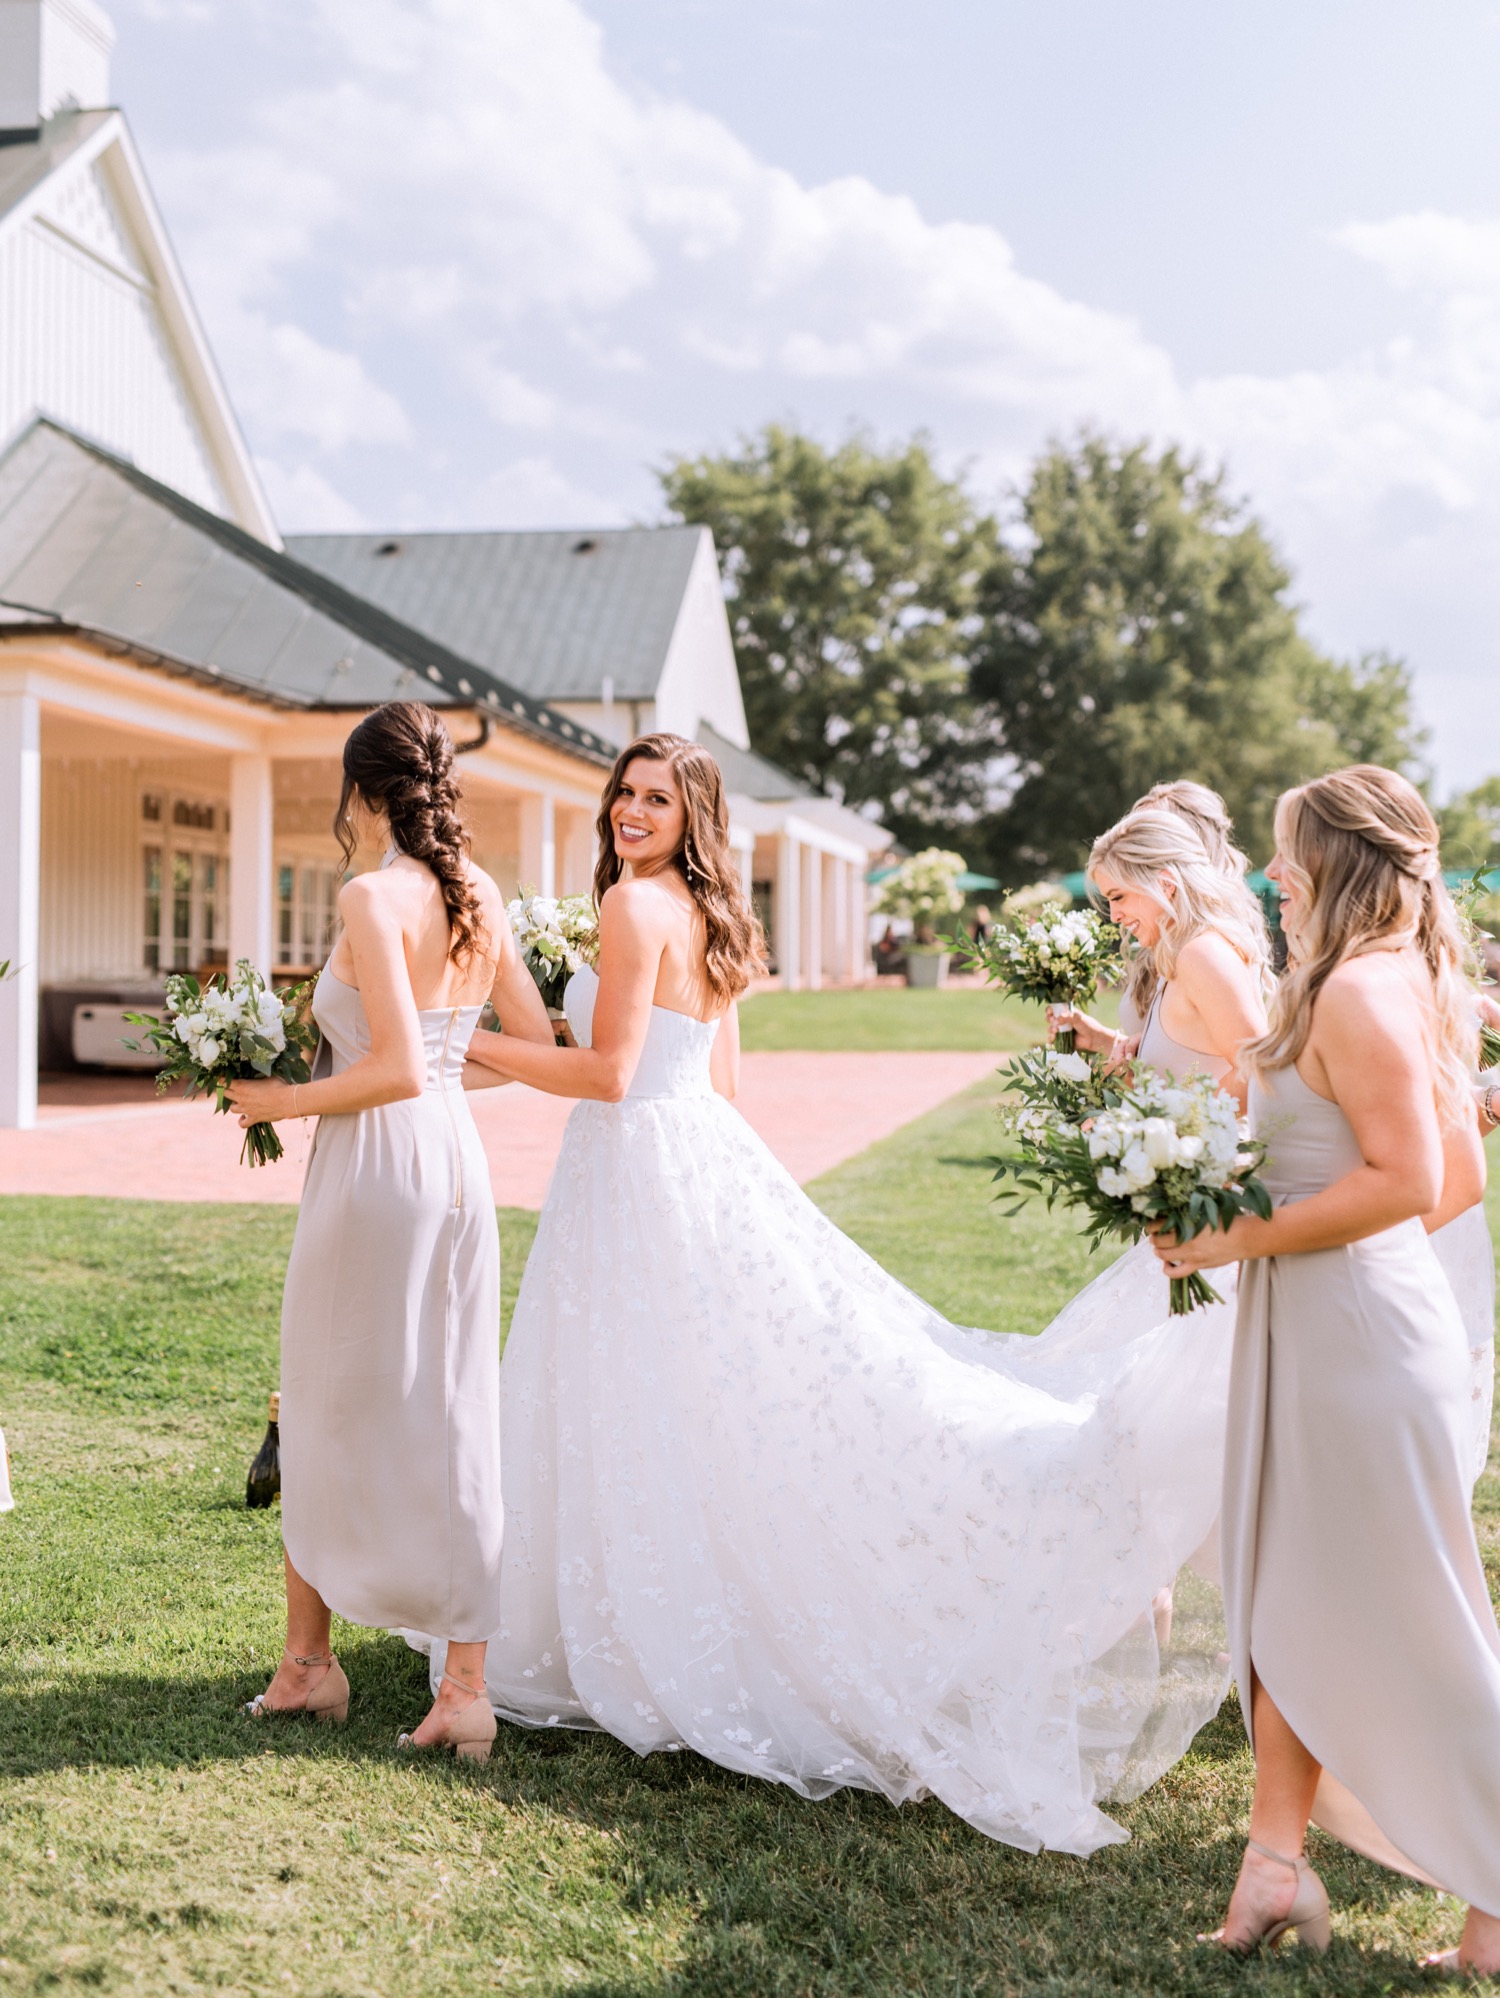 bride walking with her bridesmaids carrying her dress